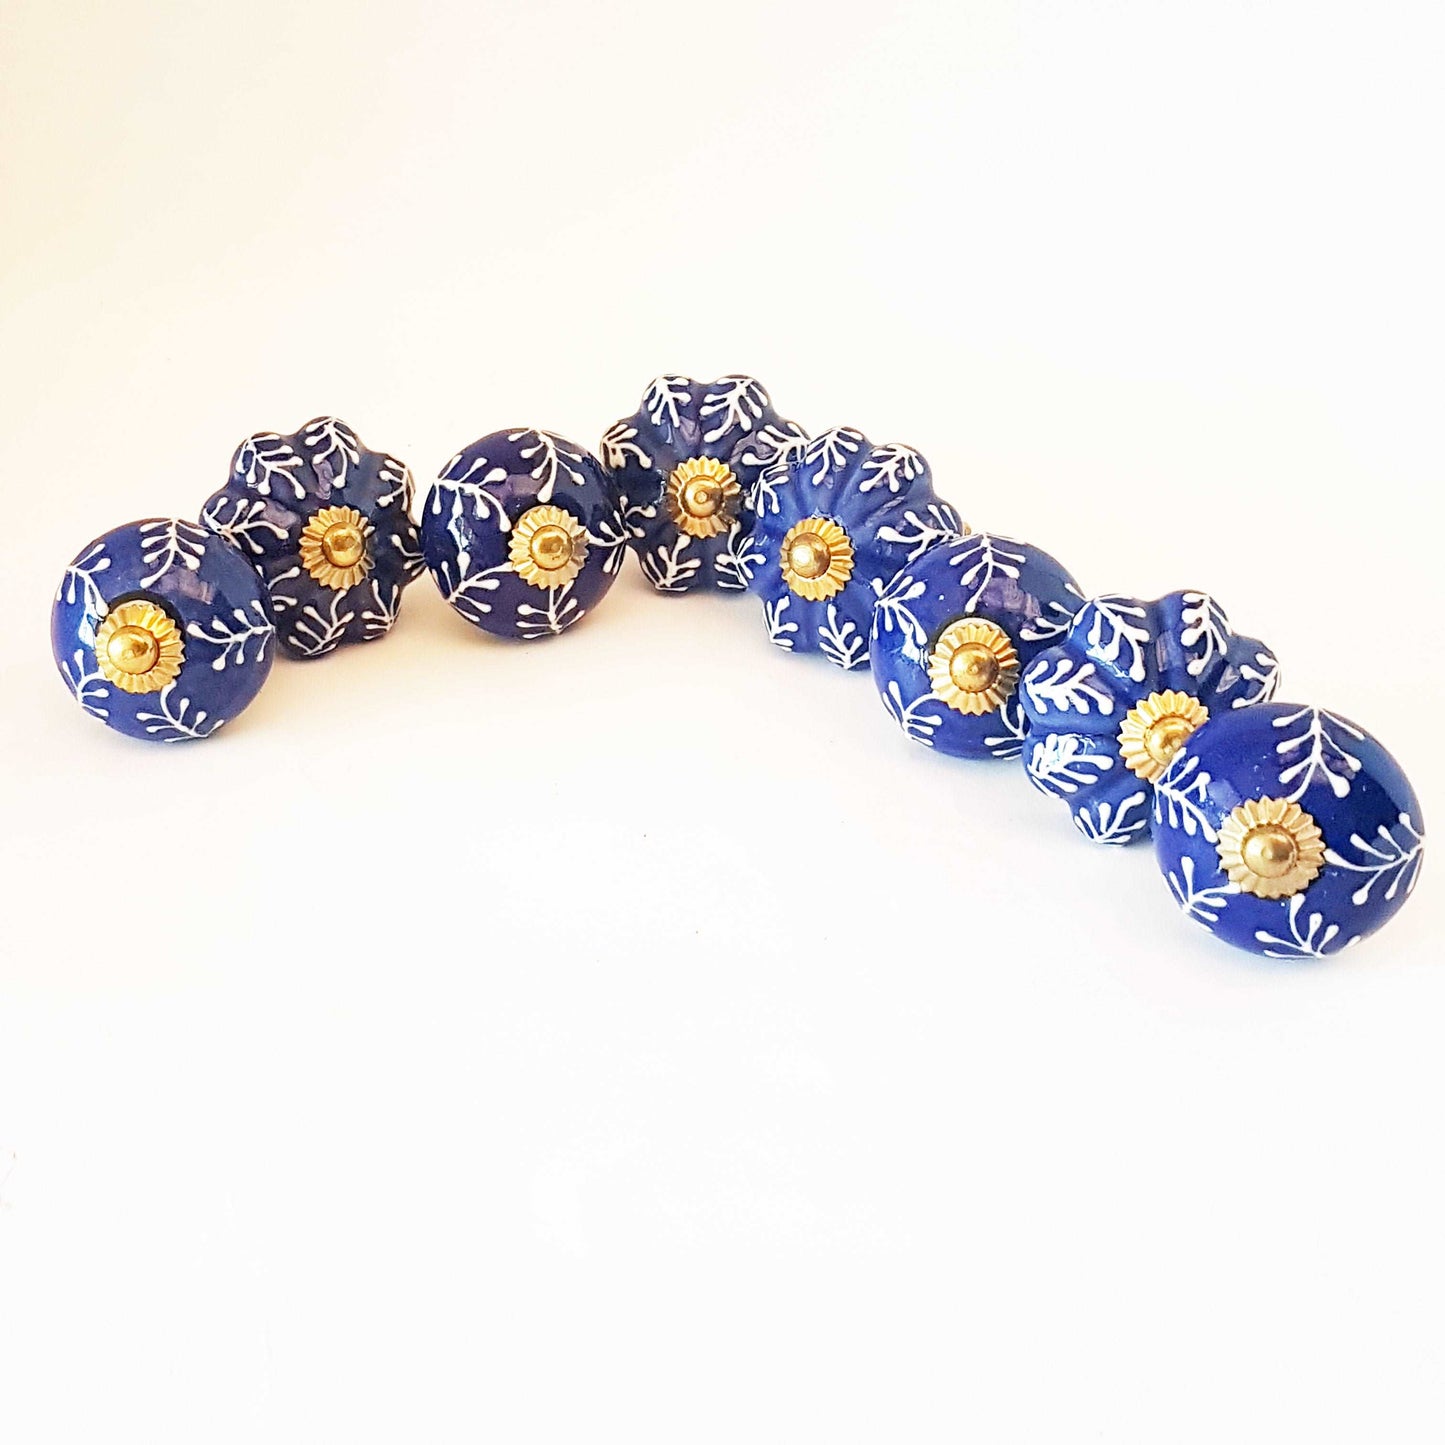 8 Delft cabinet knob drawer pulls in cobalt blue & white hand painted embossed designs. Exclusive Regal Gold  8 piece decorator collection.